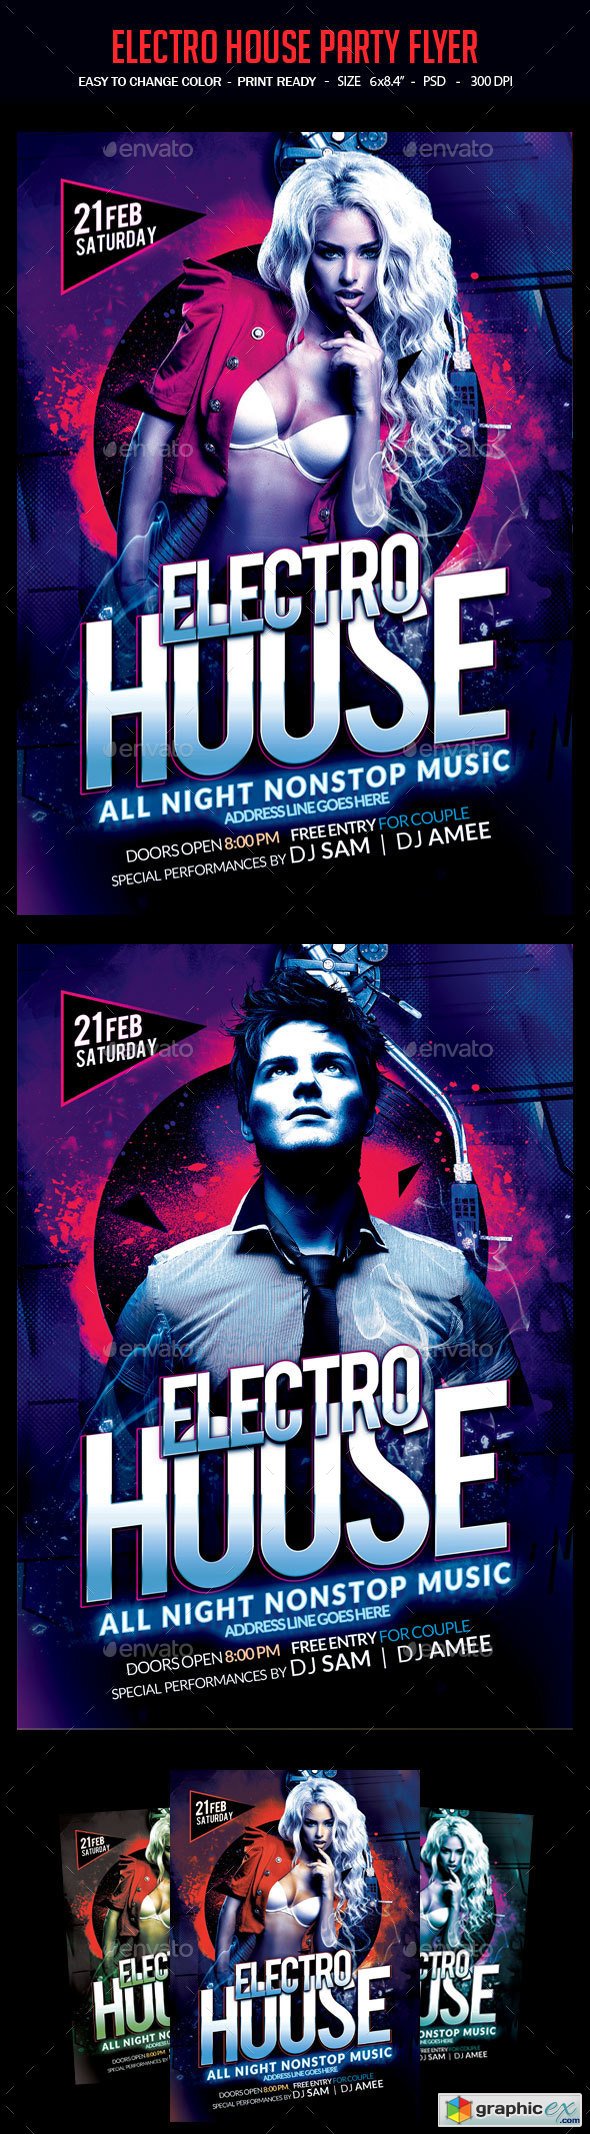 Electro House Party Flyer